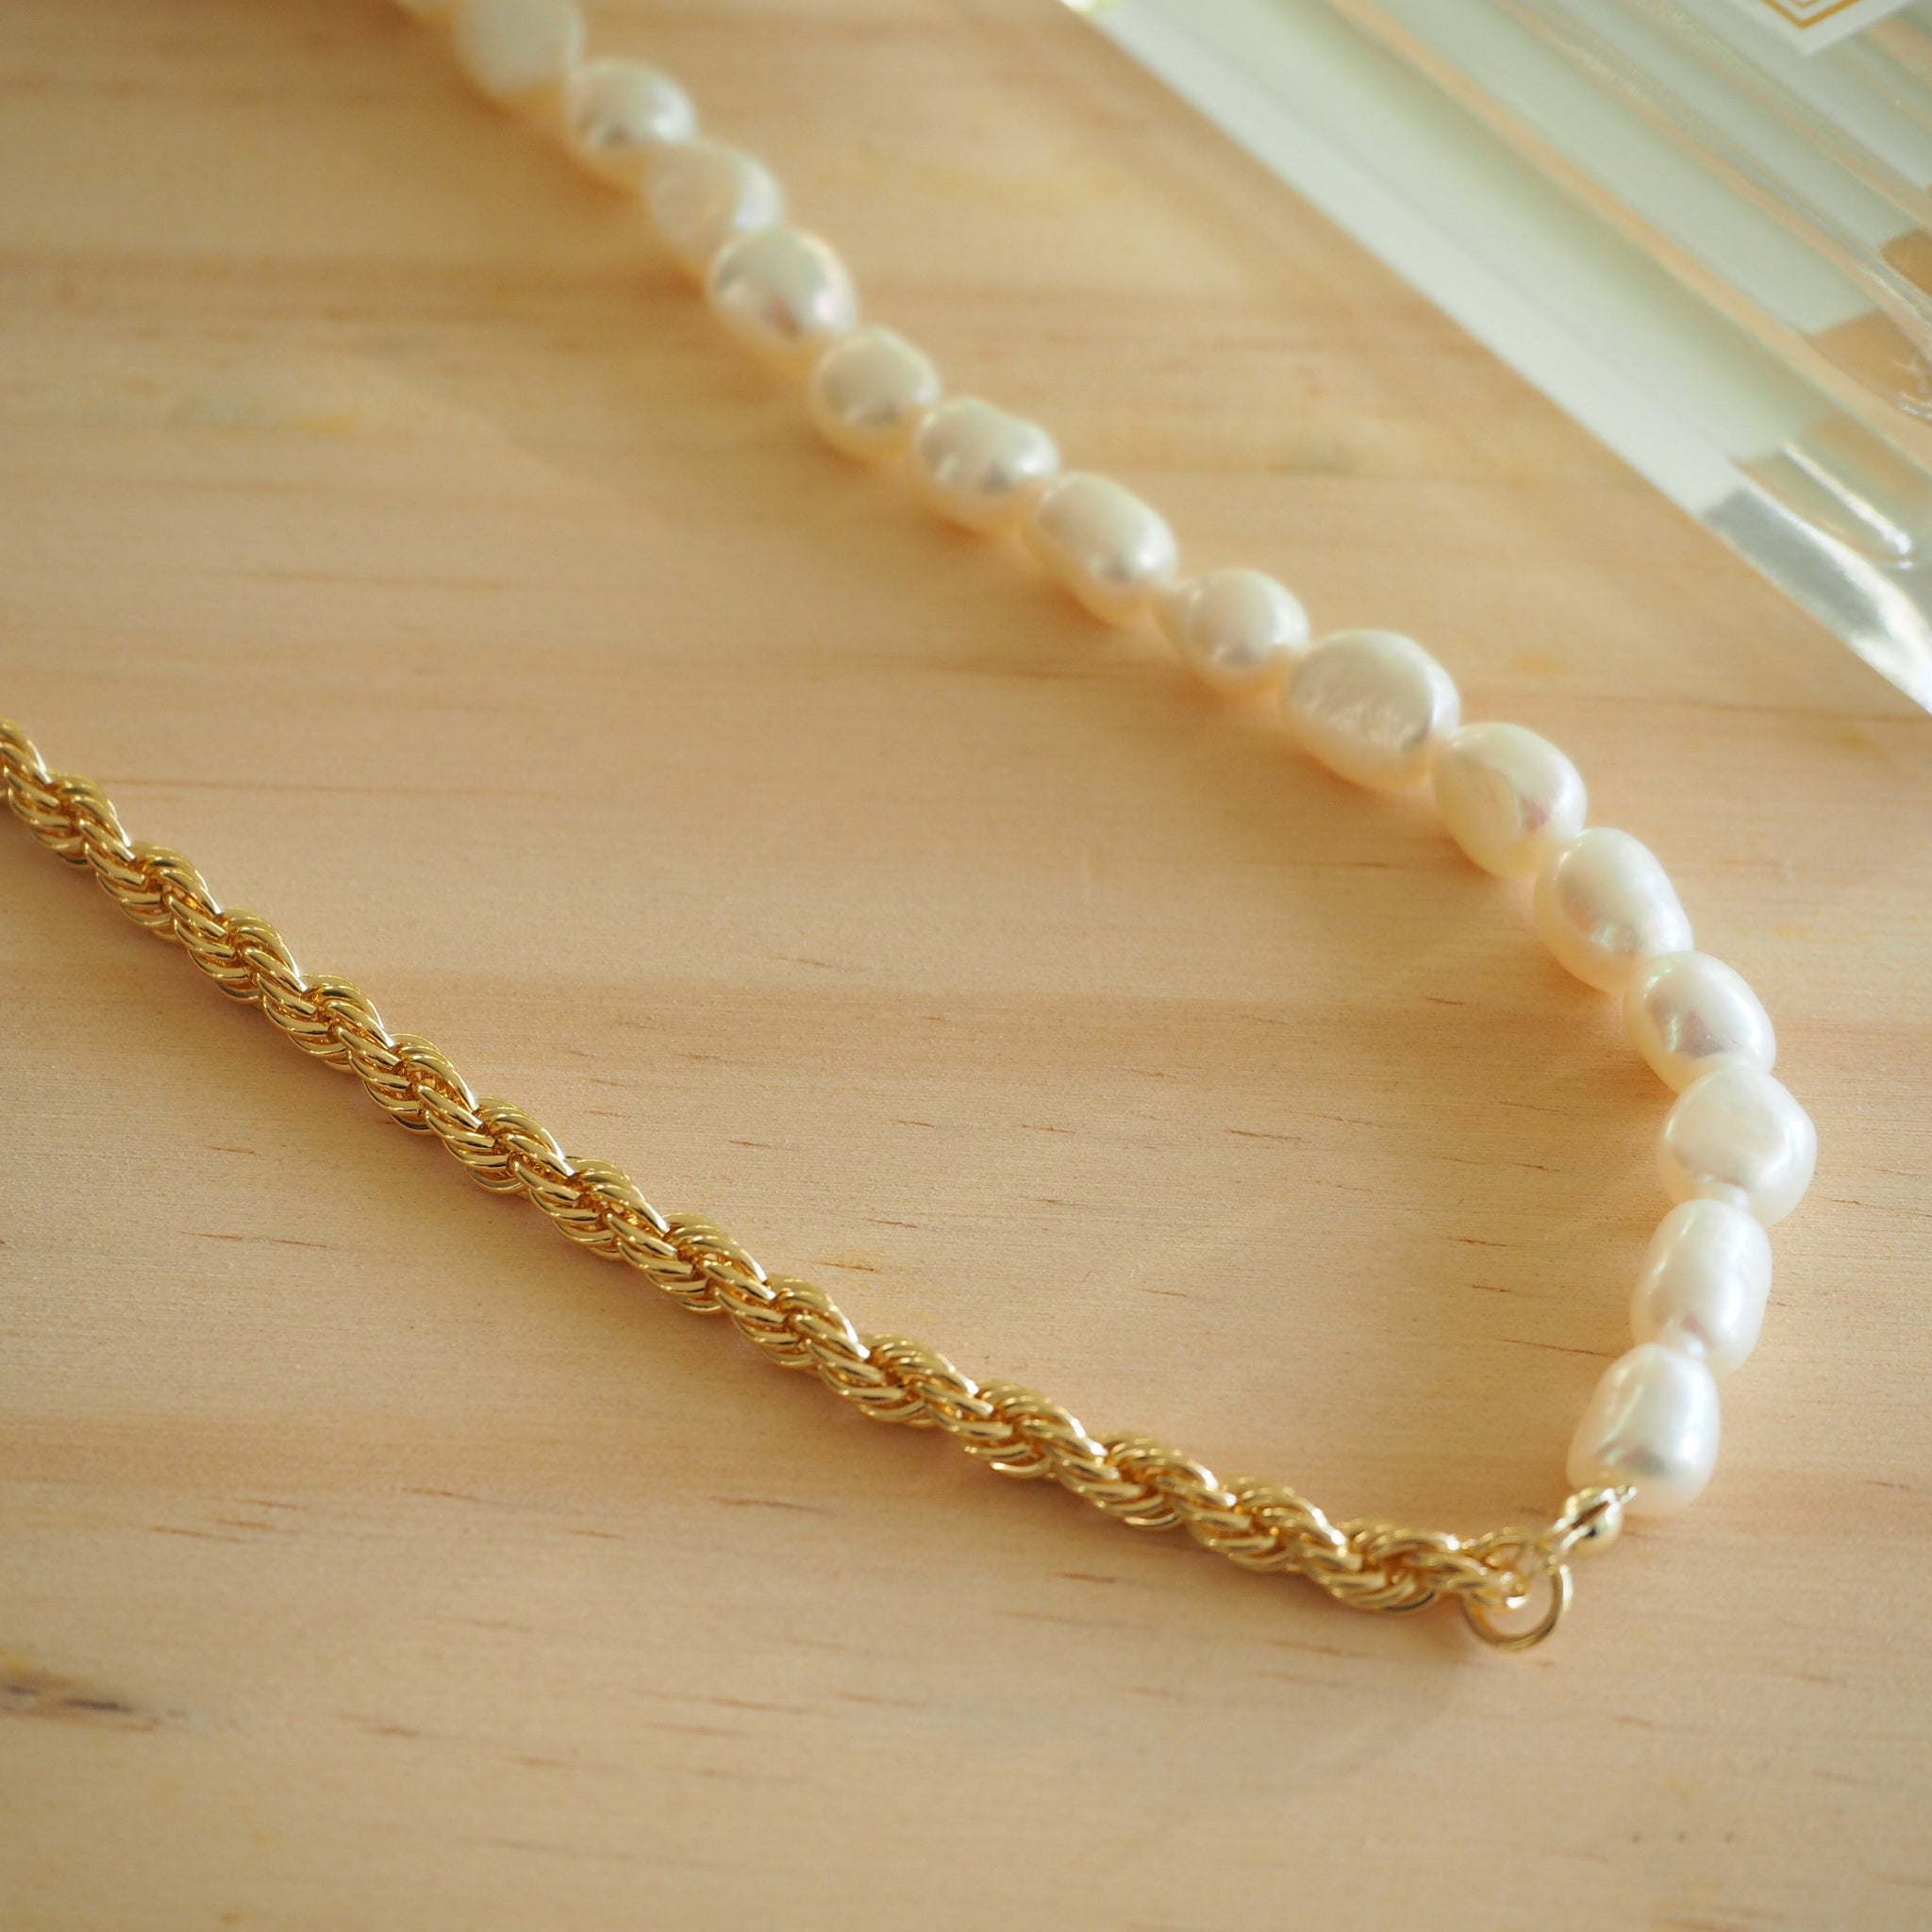 Upcycled Asymmetrical Necklace Half Chain Half Pearls | TÊTE D'ORANGE |  Wolf & Badger